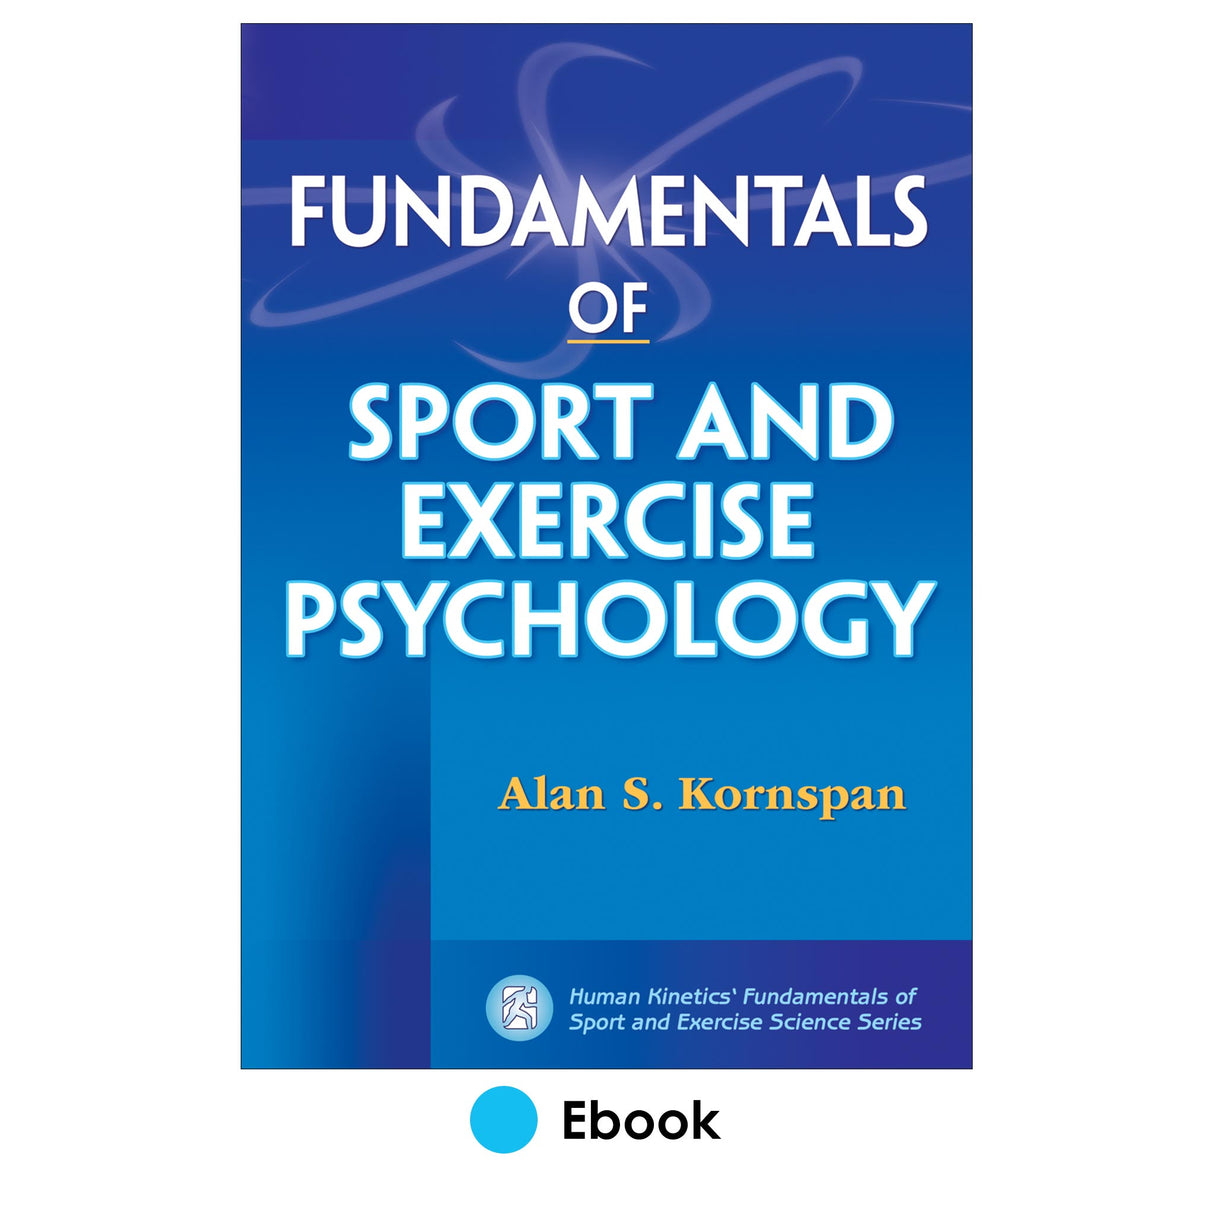 Fundamentals of Sport and Exercise Psychology PDF